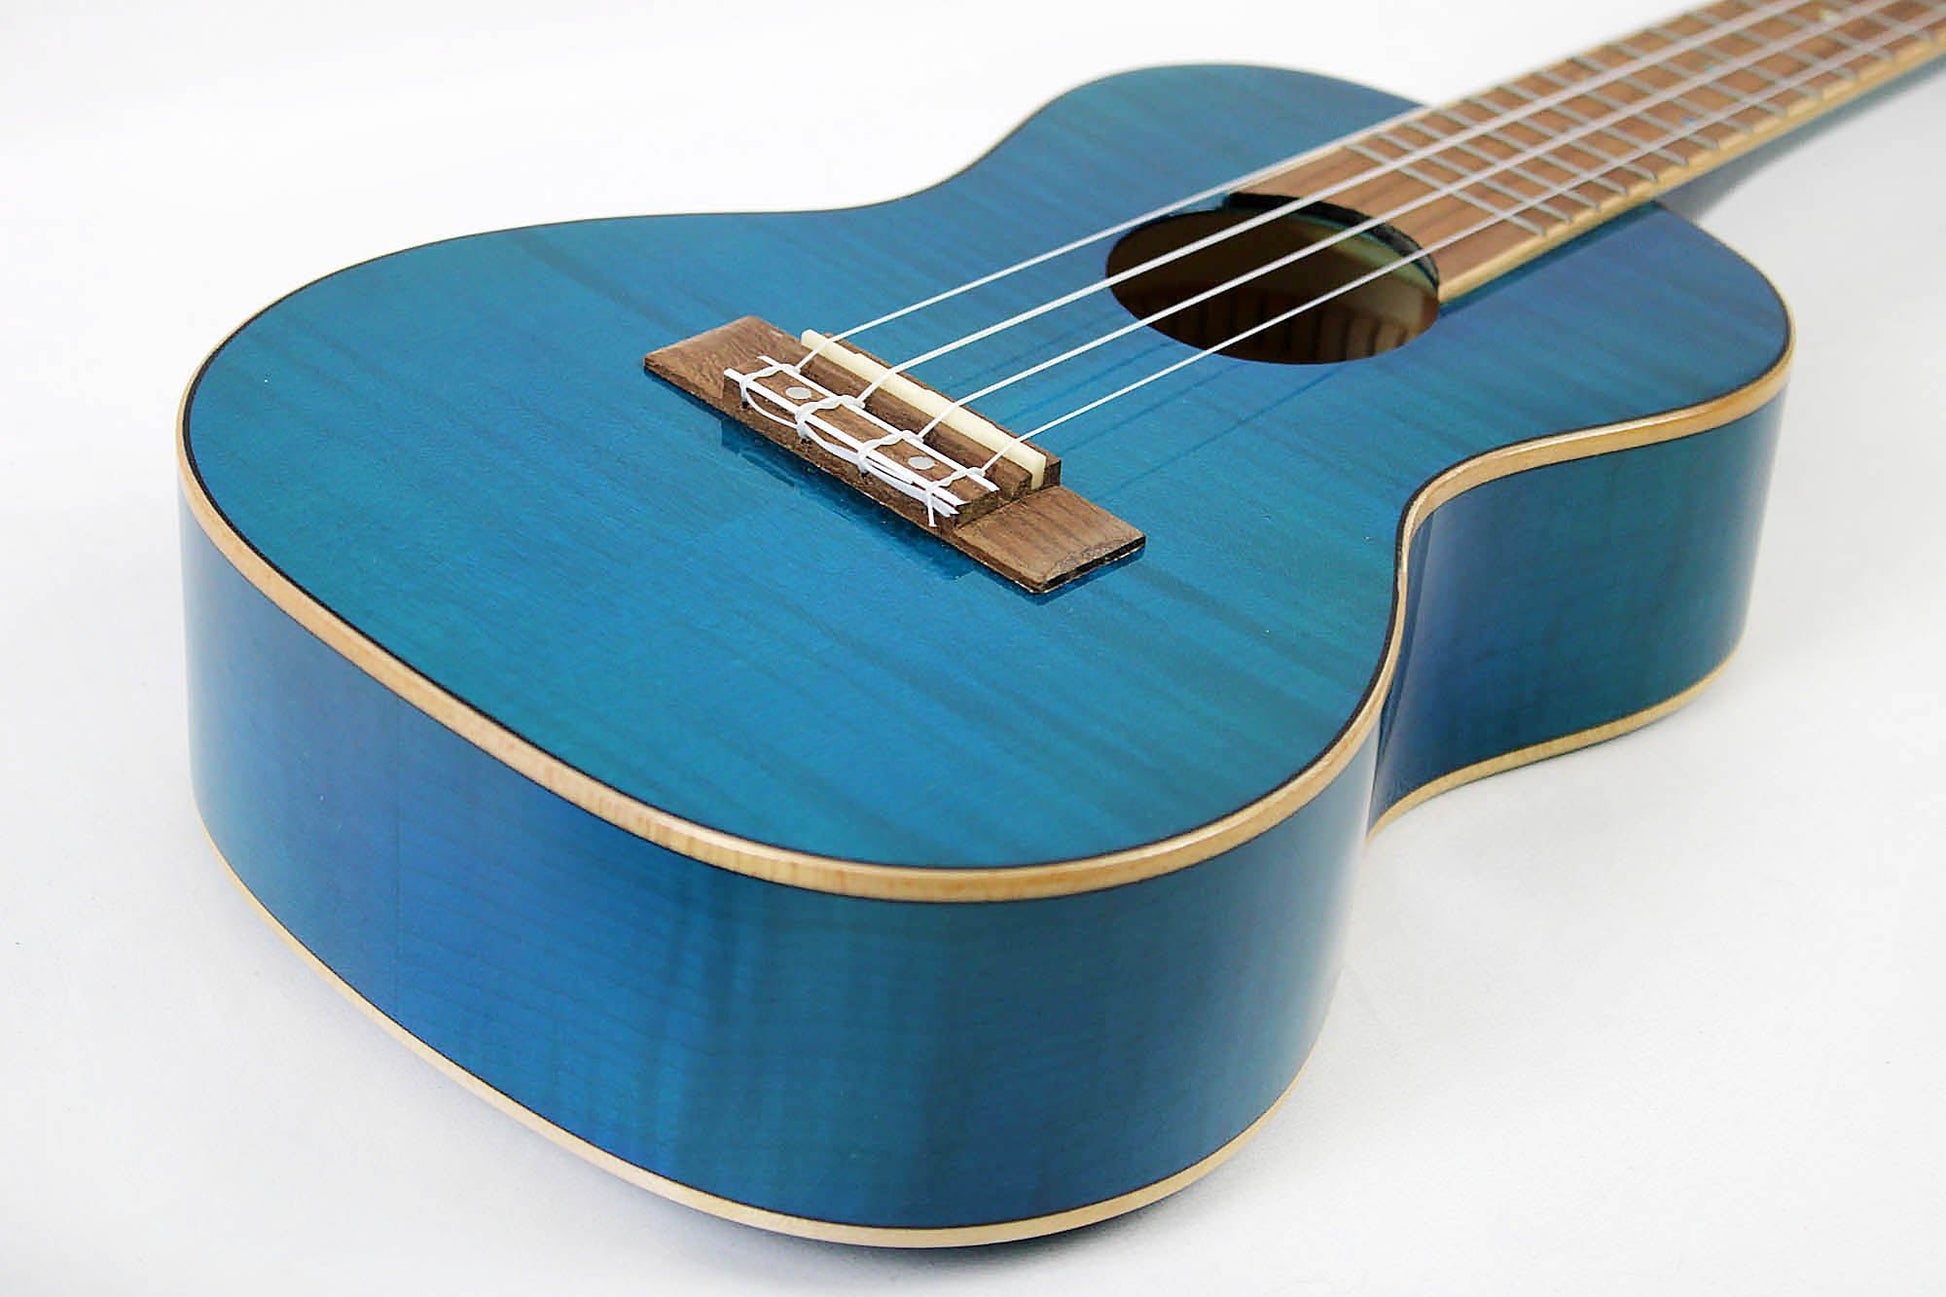 This is the front side view of the top and neck of an Amahi PGUK555BLC Flamed Maple Concert Ukulele- blue.